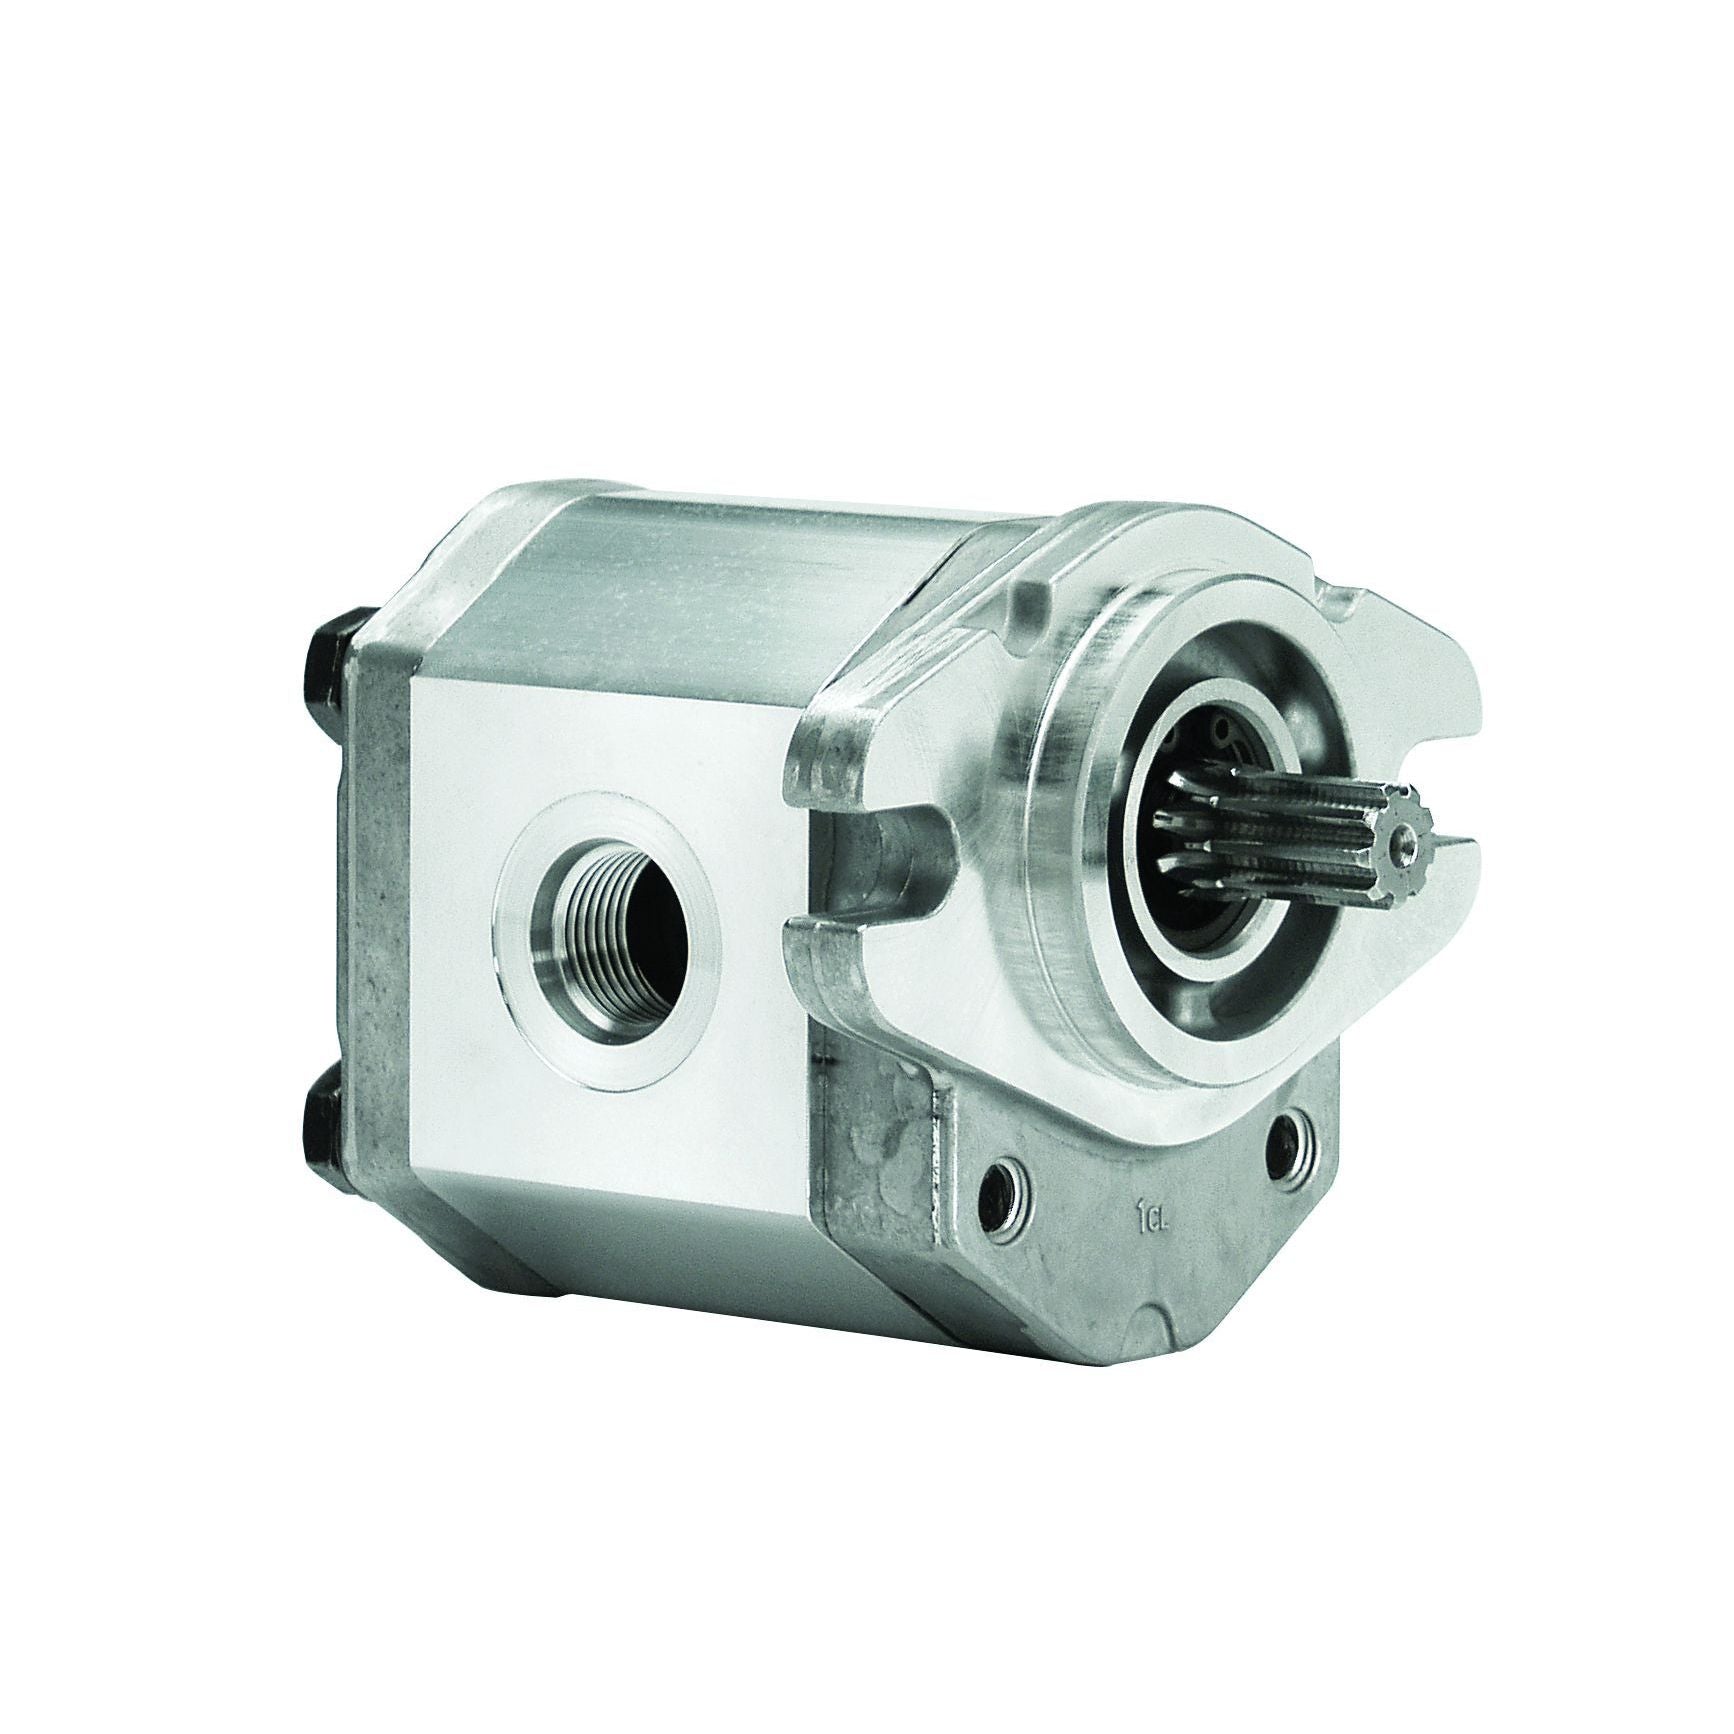 ALP2A-D-22-S1 : Marzocchi Gear Pump, CW, 16cc (0.976in3), 7.61 GPM, 3045psi, 2800 RPM, #12 SAE (3/4") In, #10 SAE (5/8") Out, Splined Shaft 9T 16/32DP, SAE A 2-Bolt Mount